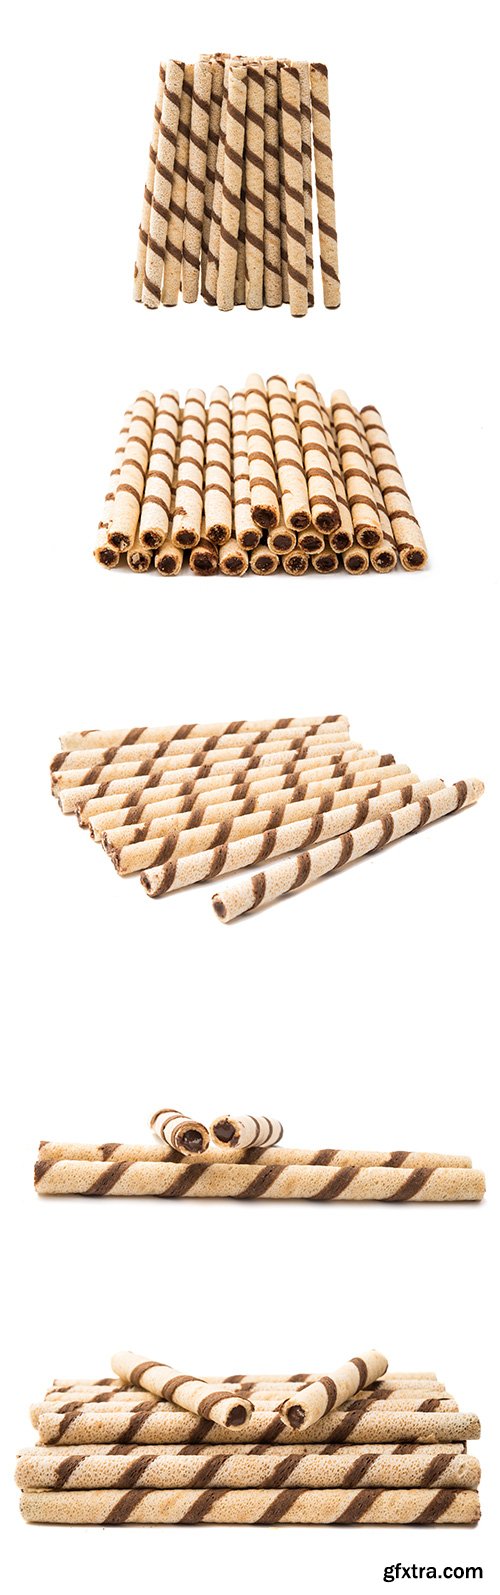 Wafer Rolls With Chocolate-2 Isolated - 15xJPGs